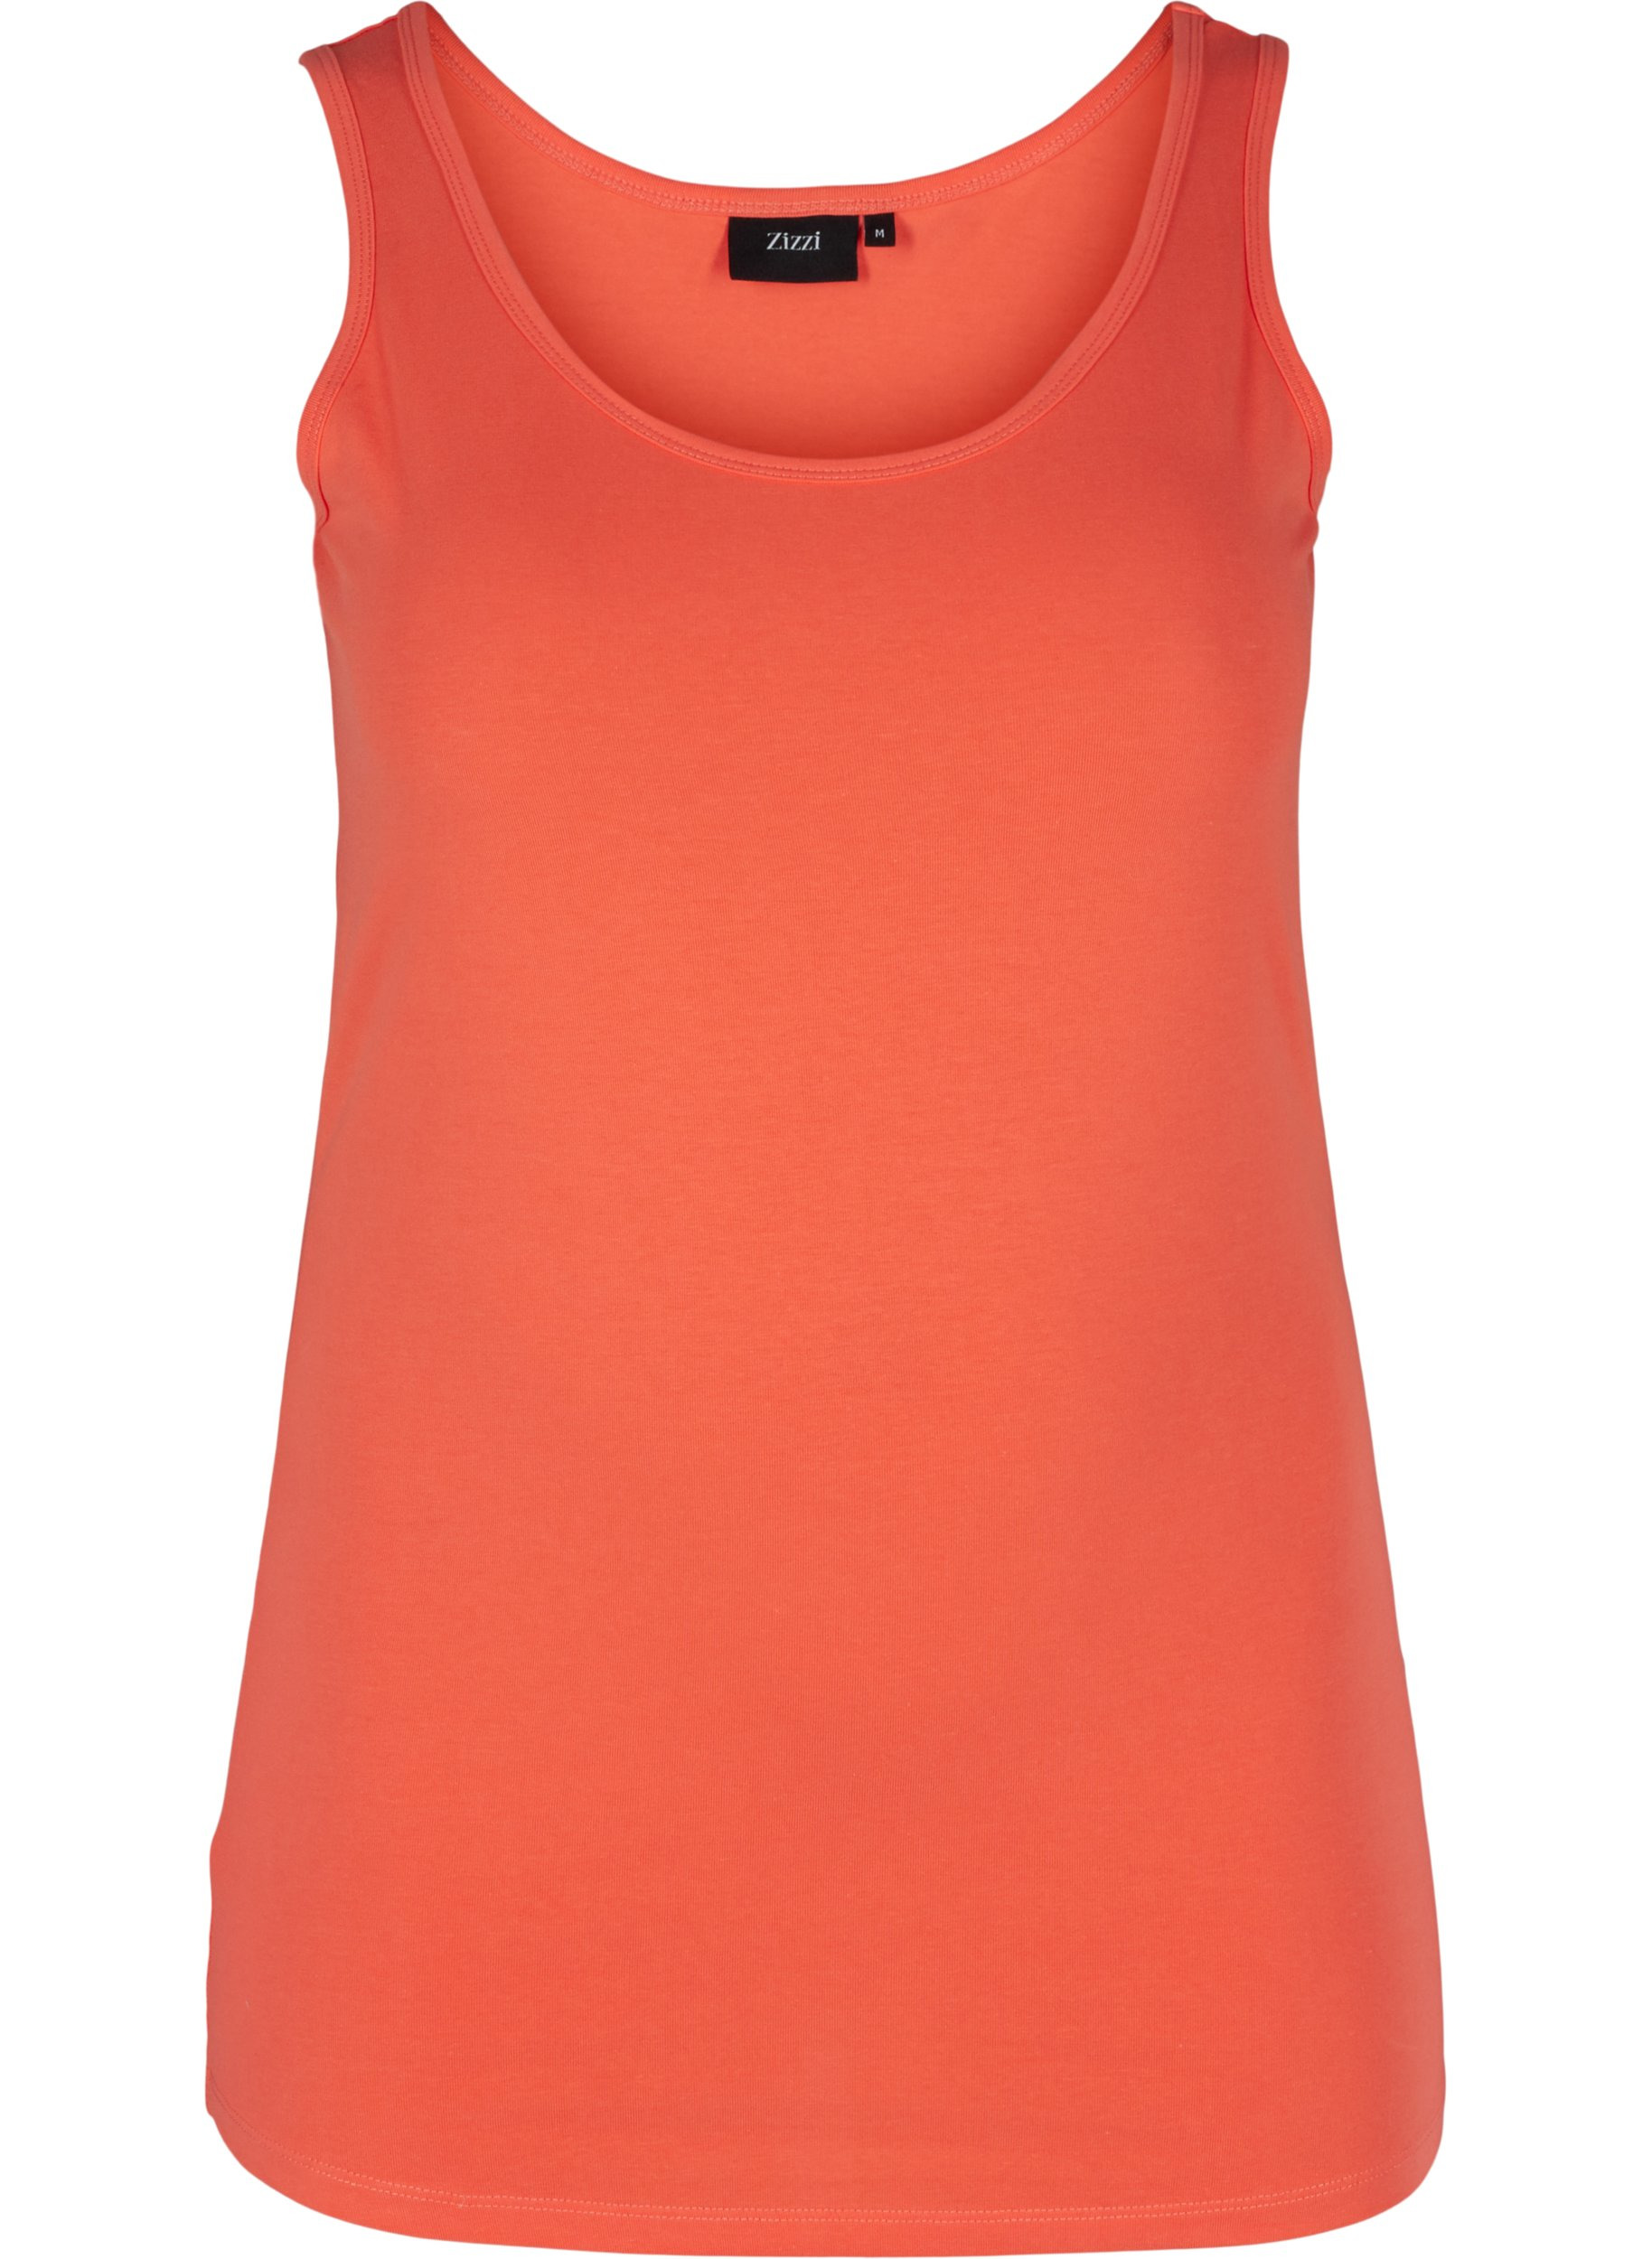 Basic top, Living Coral